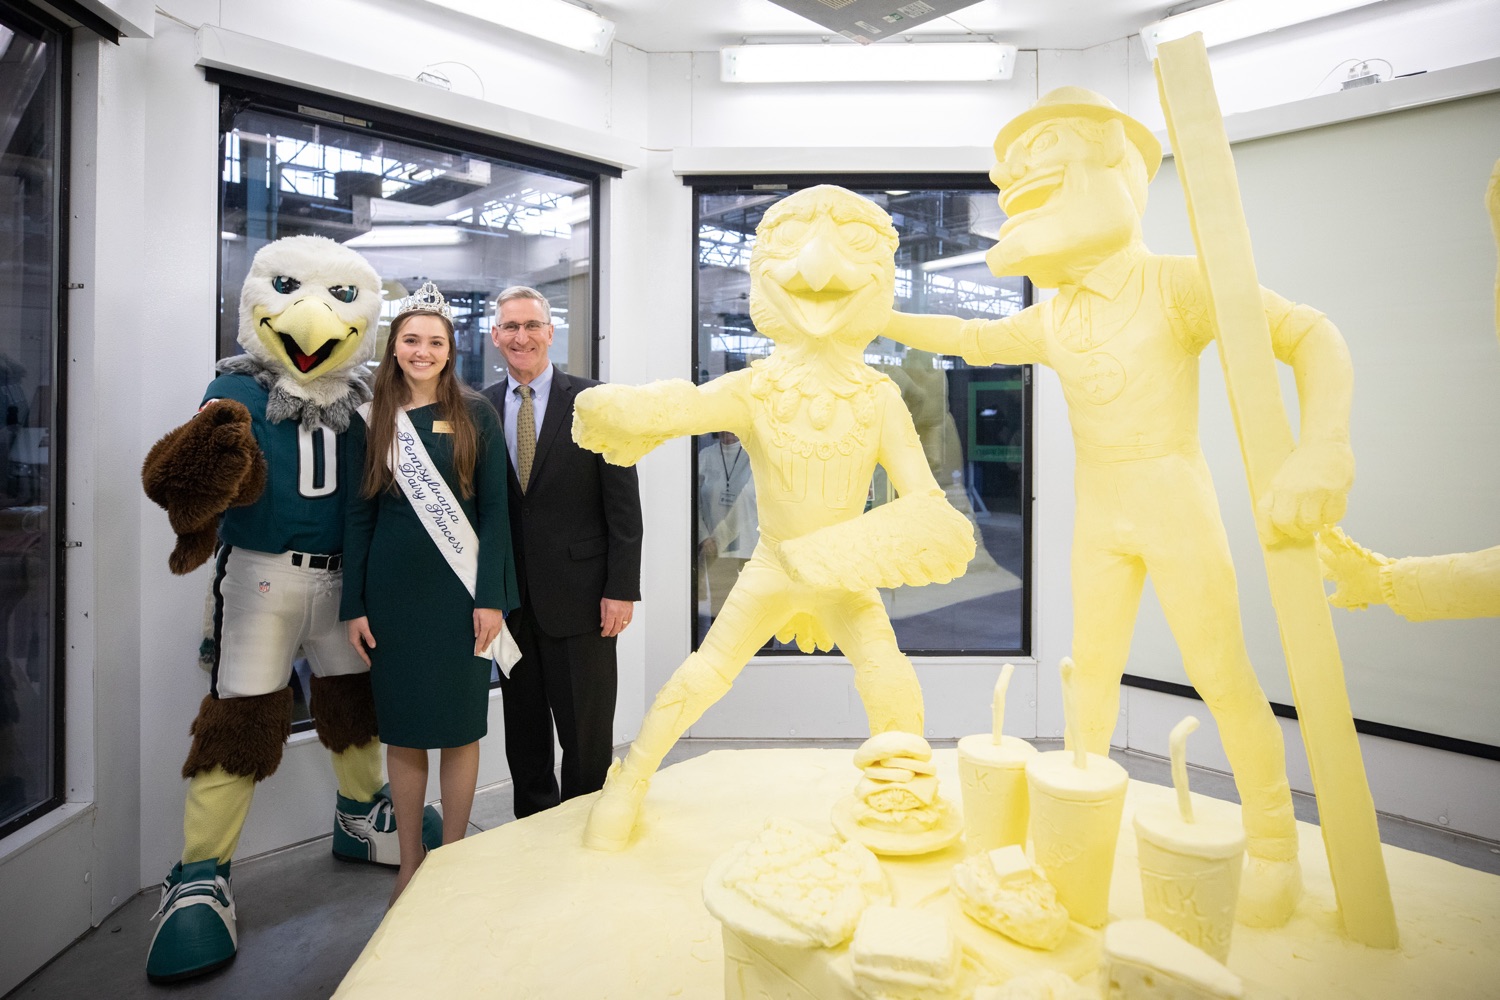 Lt. Governor John Fetterman and Secretary of Agriculture Russell Redding today unveiled the 2020 Pennsylvania Farm Show butter sculpture, carved from a half-ton of butter depicting three of Pennsylvanias beloved professional sports mascots: Philadelphia Flyers Gritty, Philadelphia Eagles Swoop, and Pittsburgh Steelers Steely McBeam celebrating with a spread of Pennsylvania dairy products. The sculpture, a long-time Farm Show staple, encourages Pennsylvanians to be a fan of Pennsylvania dairy and give a cheer to the more than 6,200 dairy farmers in the commonwealth.  Harrisburg, PA  January 2, 2020<br><a href="https://filesource.amperwave.net/commonwealthofpa/photo/17646_agric_butter_sculpture_dz_012.jpg" target="_blank">⇣ Download Photo</a>